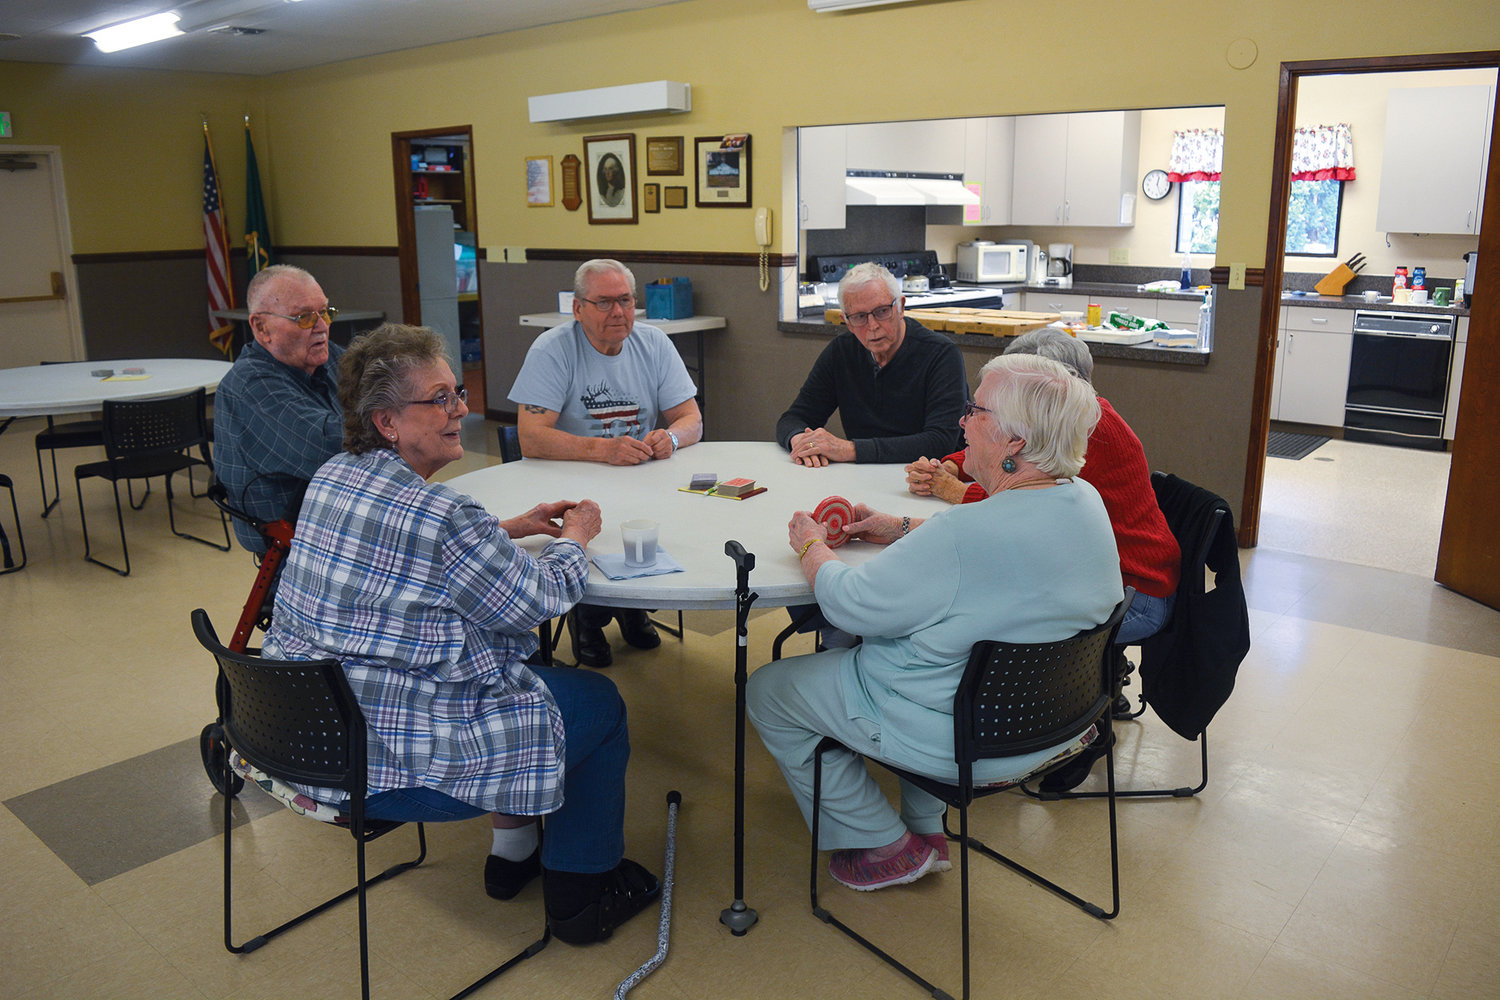 A group of seniors prepare to play a game of pinochle at the Battle Ground Senior Center on April 5.